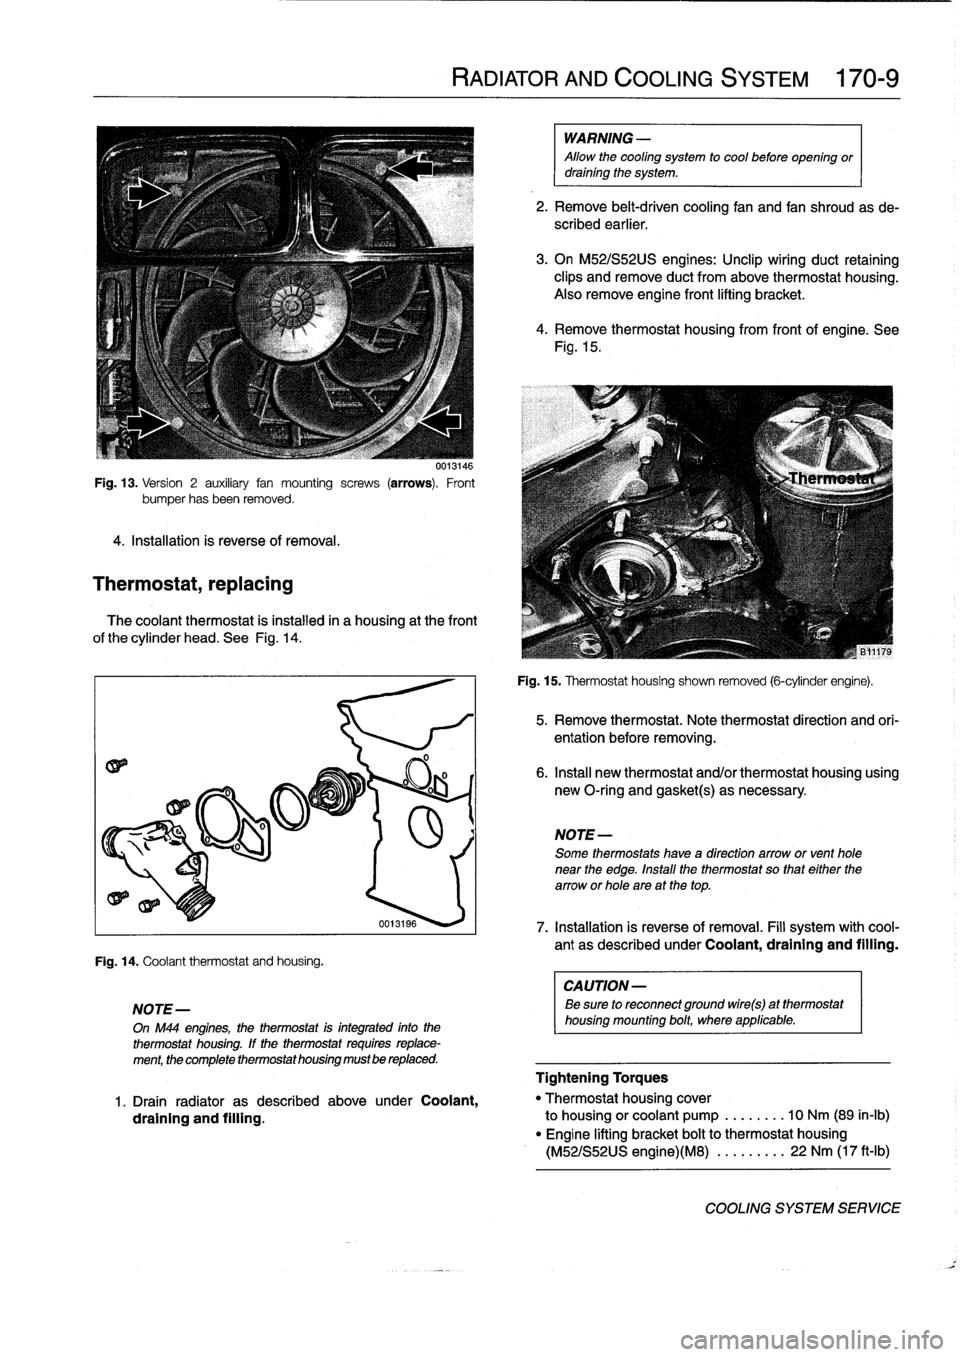 BMW M3 1993 E36 Owners Guide 
Fig
.
13
.
Version
2
auxiliary
fan
mounting
screws
(arrows)
.
Front
bumper
hasbeen
removed
.

4
.
Installation
is
reverse
of
removal
.

Thermostat,
replacing

0013146

The
coolant
thermostat
is
insta